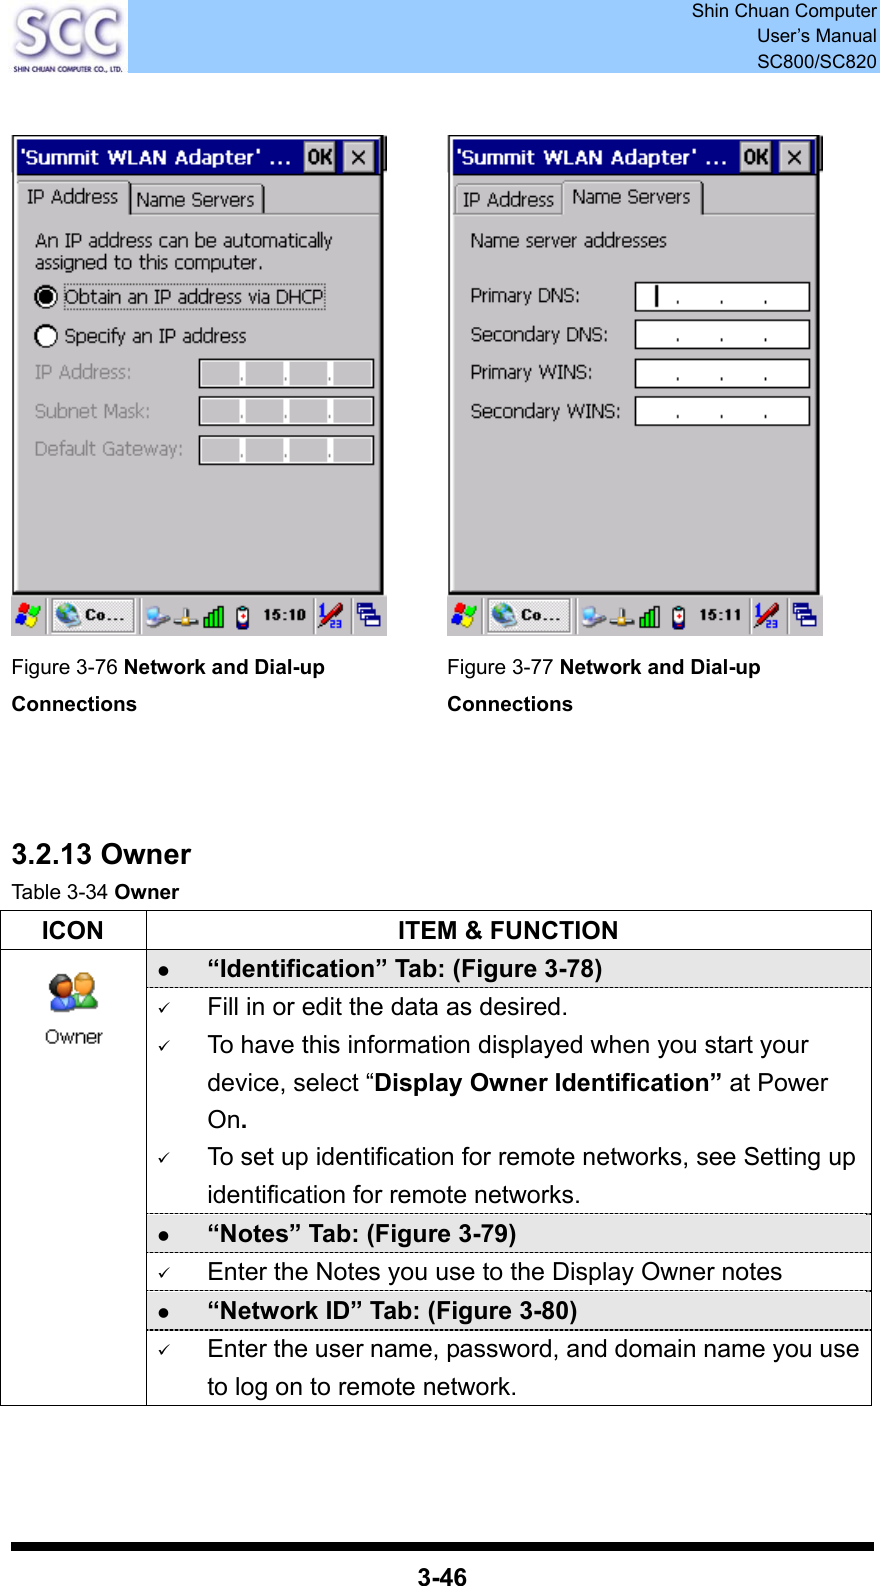  Shin Chuan Computer User’s Manual SC800/SC820  3-46     Figure 3-76 Network and Dial-up Connections Figure 3-77 Network and Dial-up Connections    3.2.13 Owner Table 3-34 Owner ICON  ITEM &amp; FUNCTION z “Identification” Tab: (Figure 3-78) 9 Fill in or edit the data as desired. 9 To have this information displayed when you start your device, select “Display Owner Identification” at Power On. 9 To set up identification for remote networks, see Setting up identification for remote networks. z “Notes” Tab: (Figure 3-79) 9 Enter the Notes you use to the Display Owner notes z “Network ID” Tab: (Figure 3-80)  9 Enter the user name, password, and domain name you use to log on to remote network.   